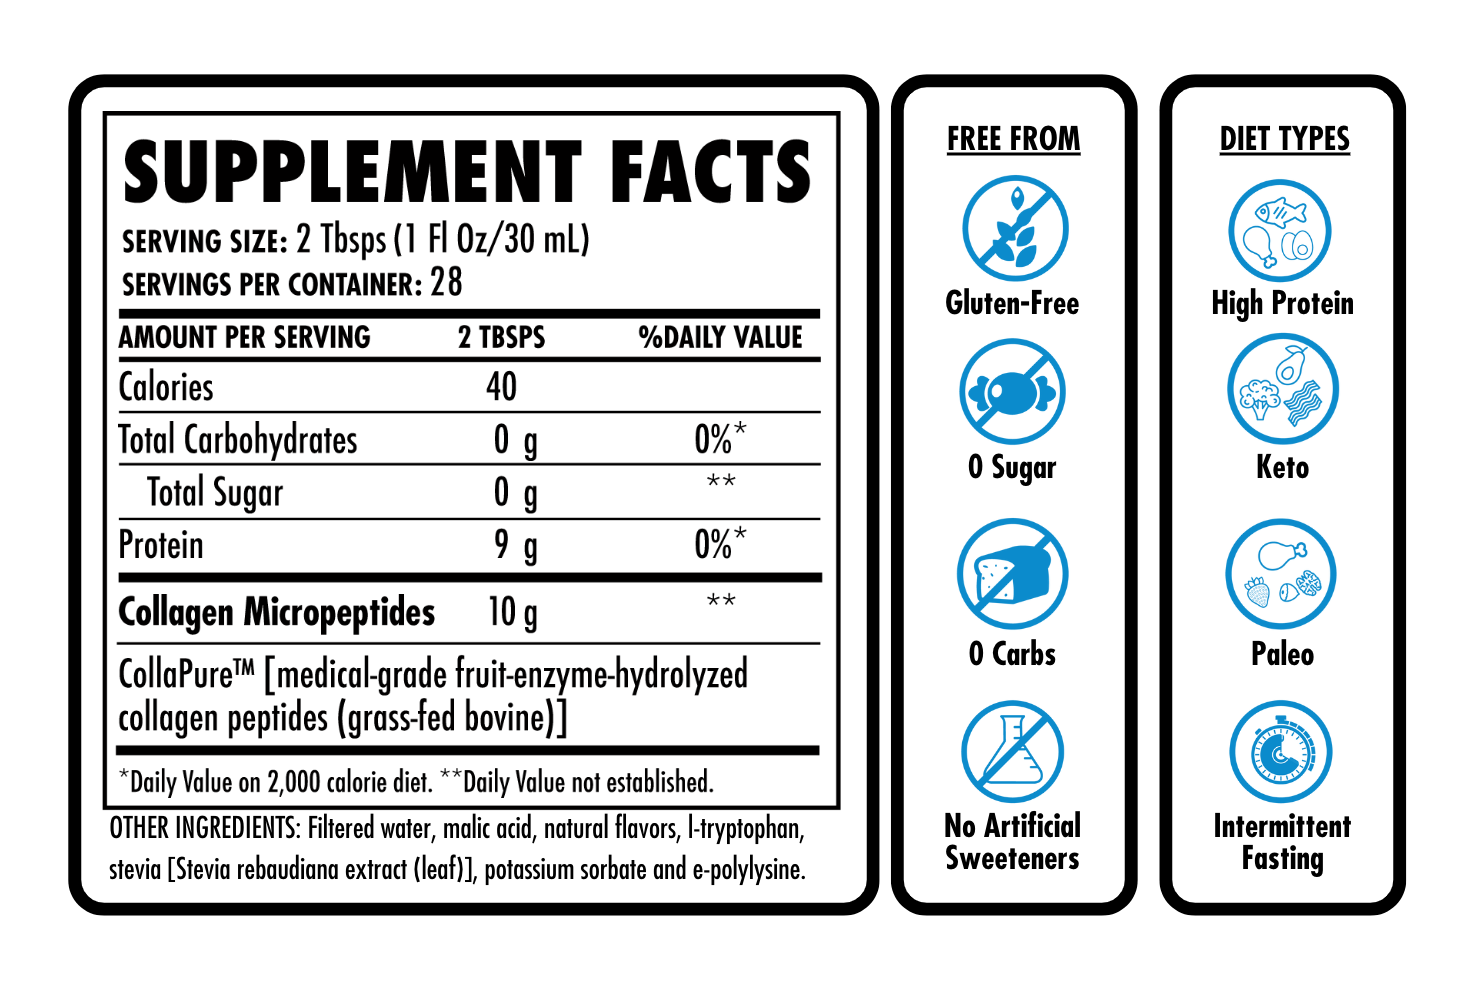 The supplement facts for AminoSculpt Micropeptides. Calories: 40, Zero Sugar, Zero Carbohydrates, 9 grams of protein. Gluten-Free, No Artificial Sweeteners. It's suitable for high protein diets, keto diets, paleo diets and intermittent fasting diets.